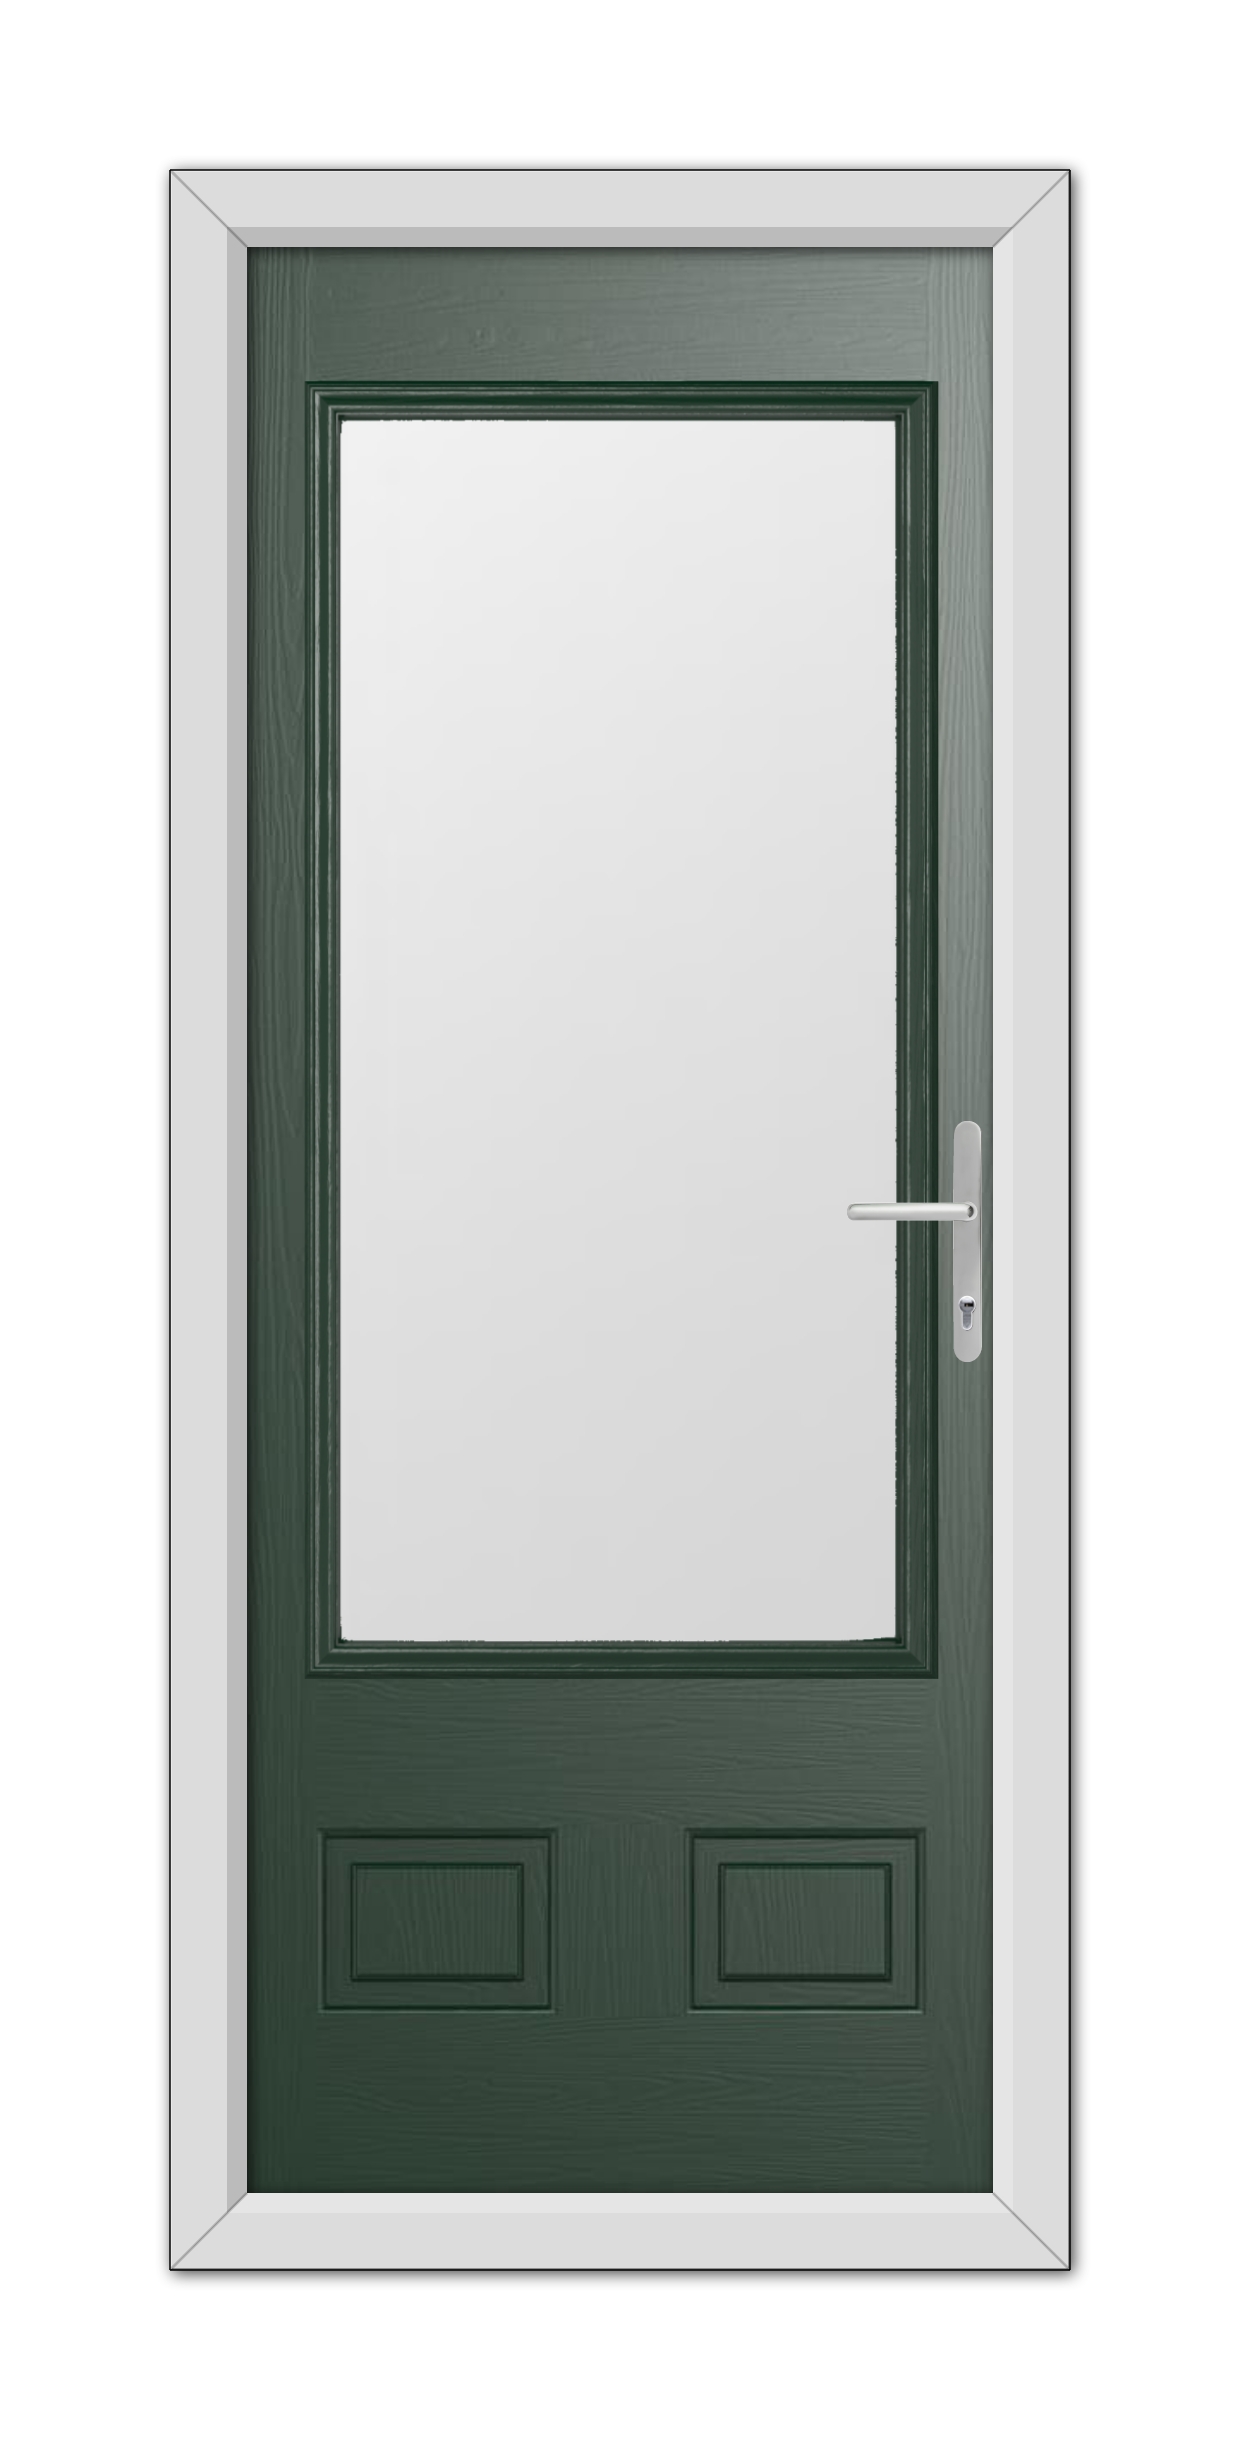 A Green Walcot Composite Door 48mm Timber Core with a white frame, featuring a central rectangular panel and two smaller panels at the bottom, equipped with a modern white handle.